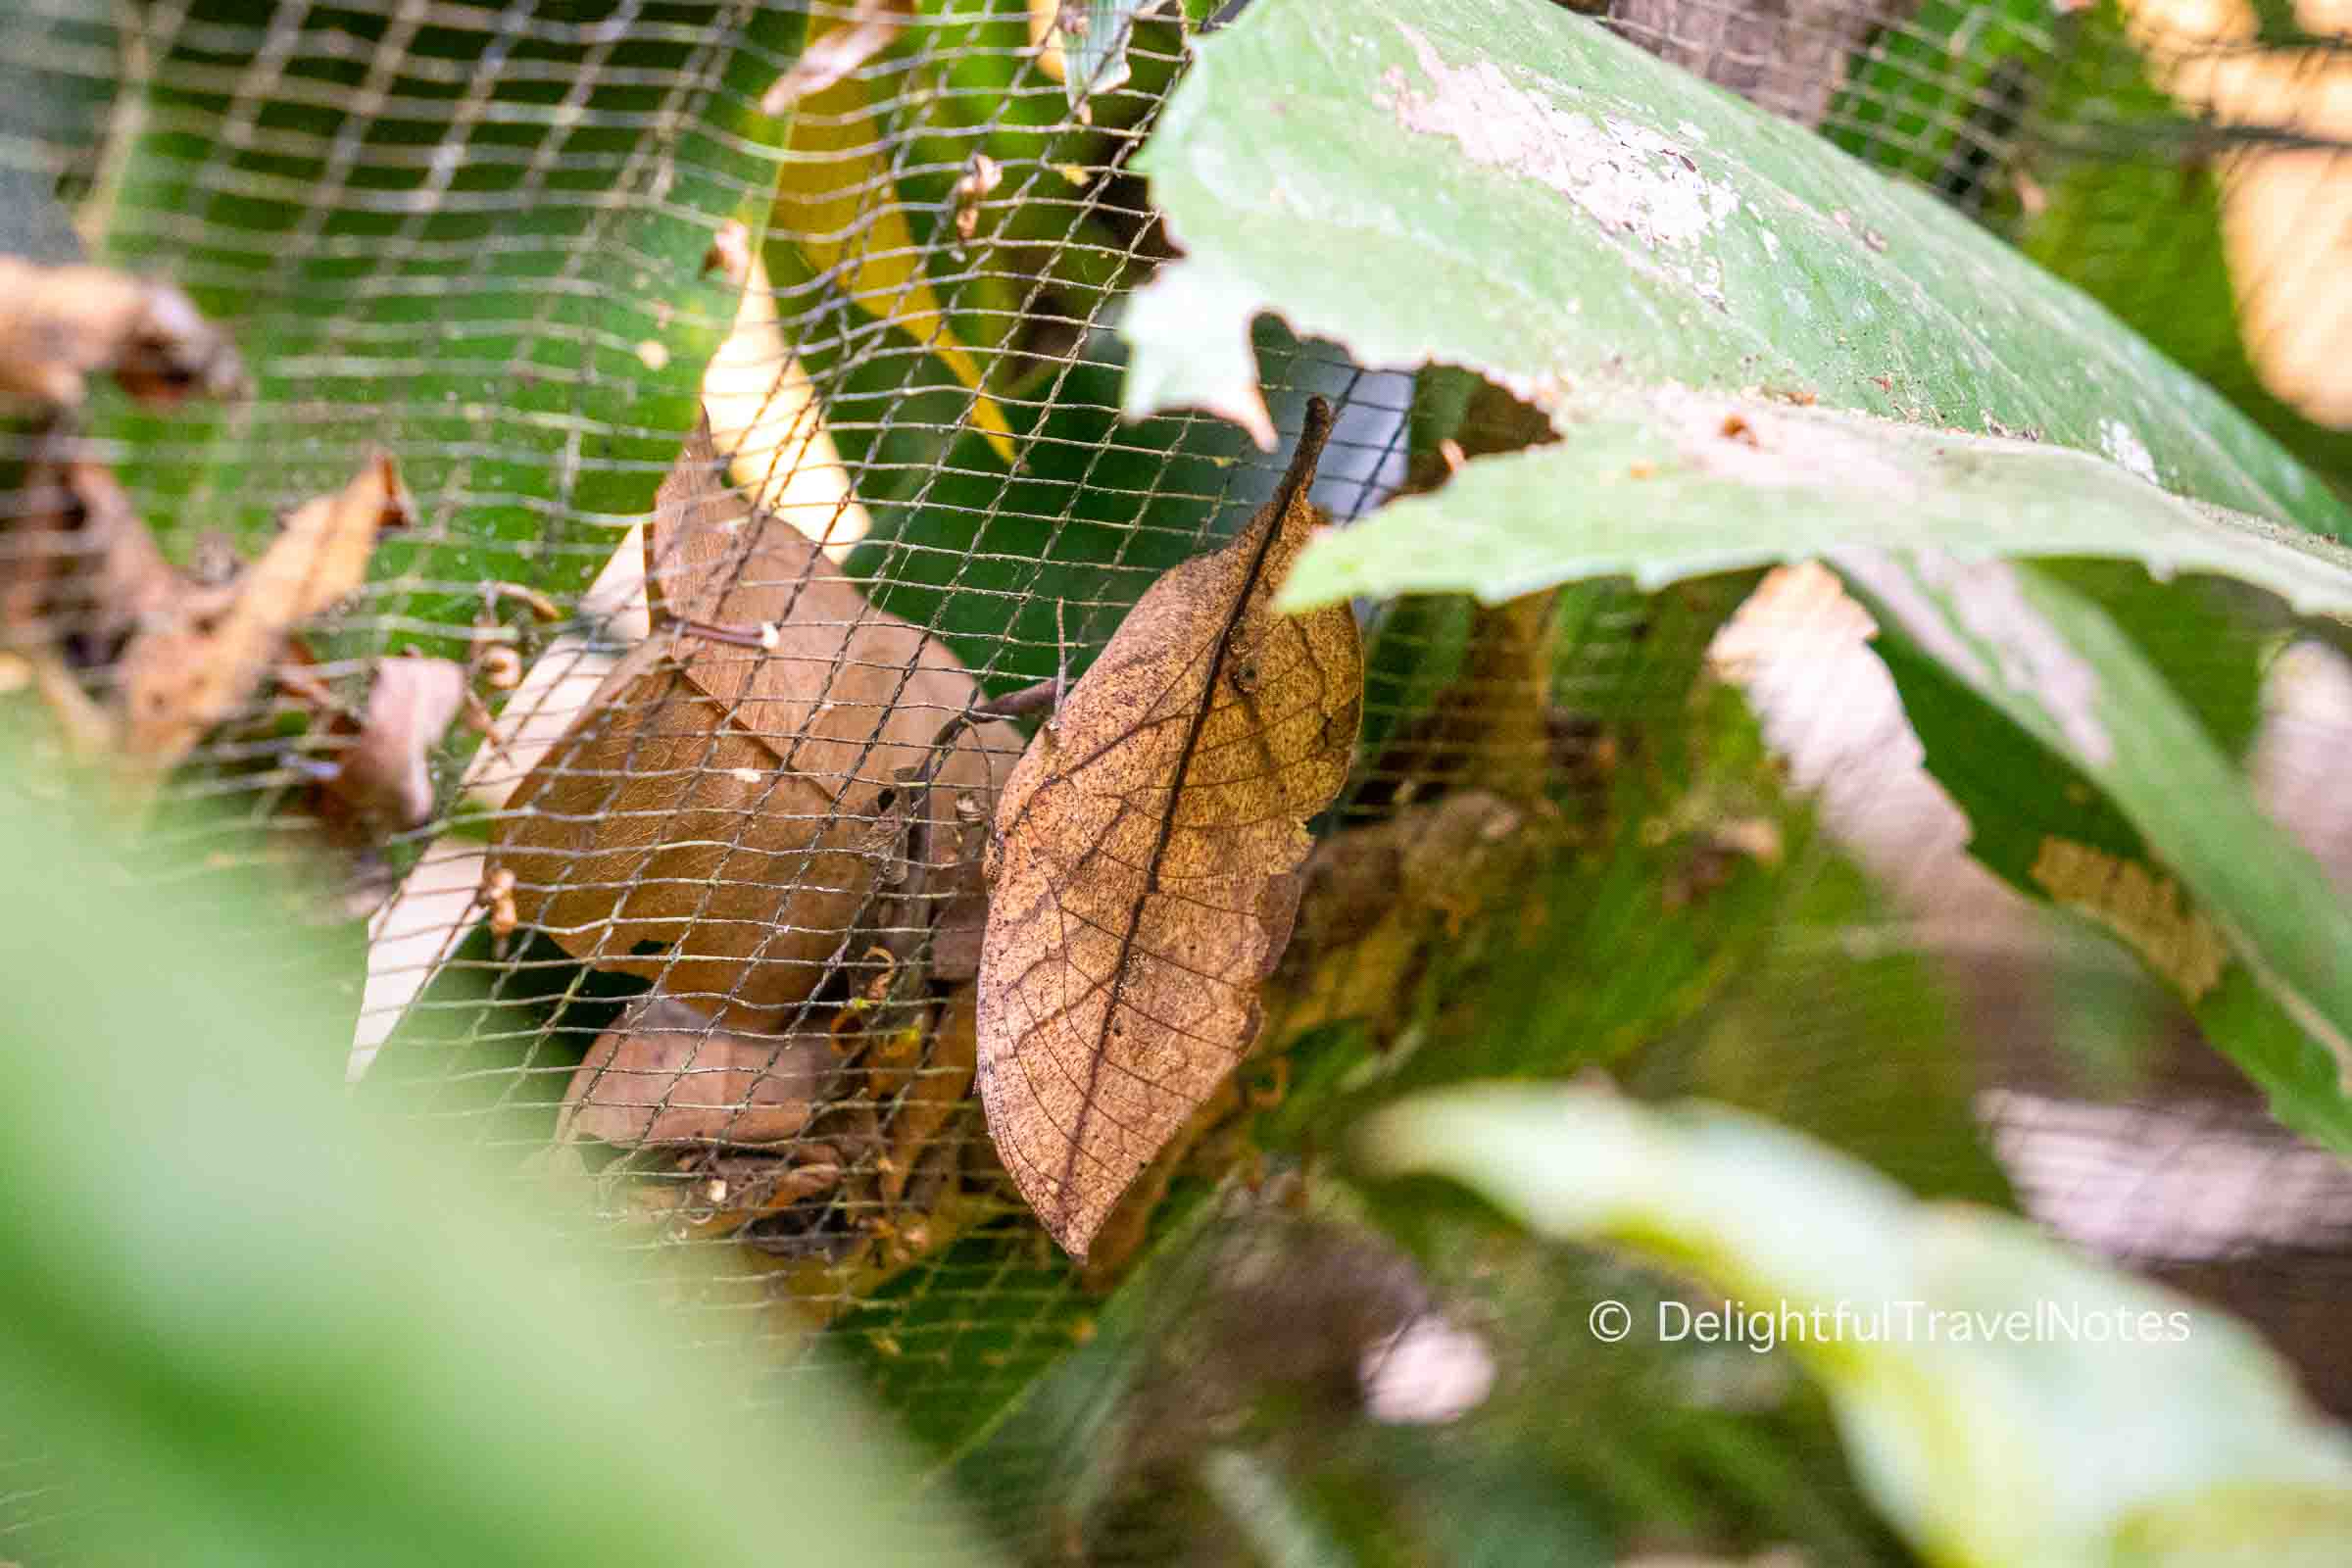 A dead leaf butterfly at the Butterfly Park near Kuang Si Falls.